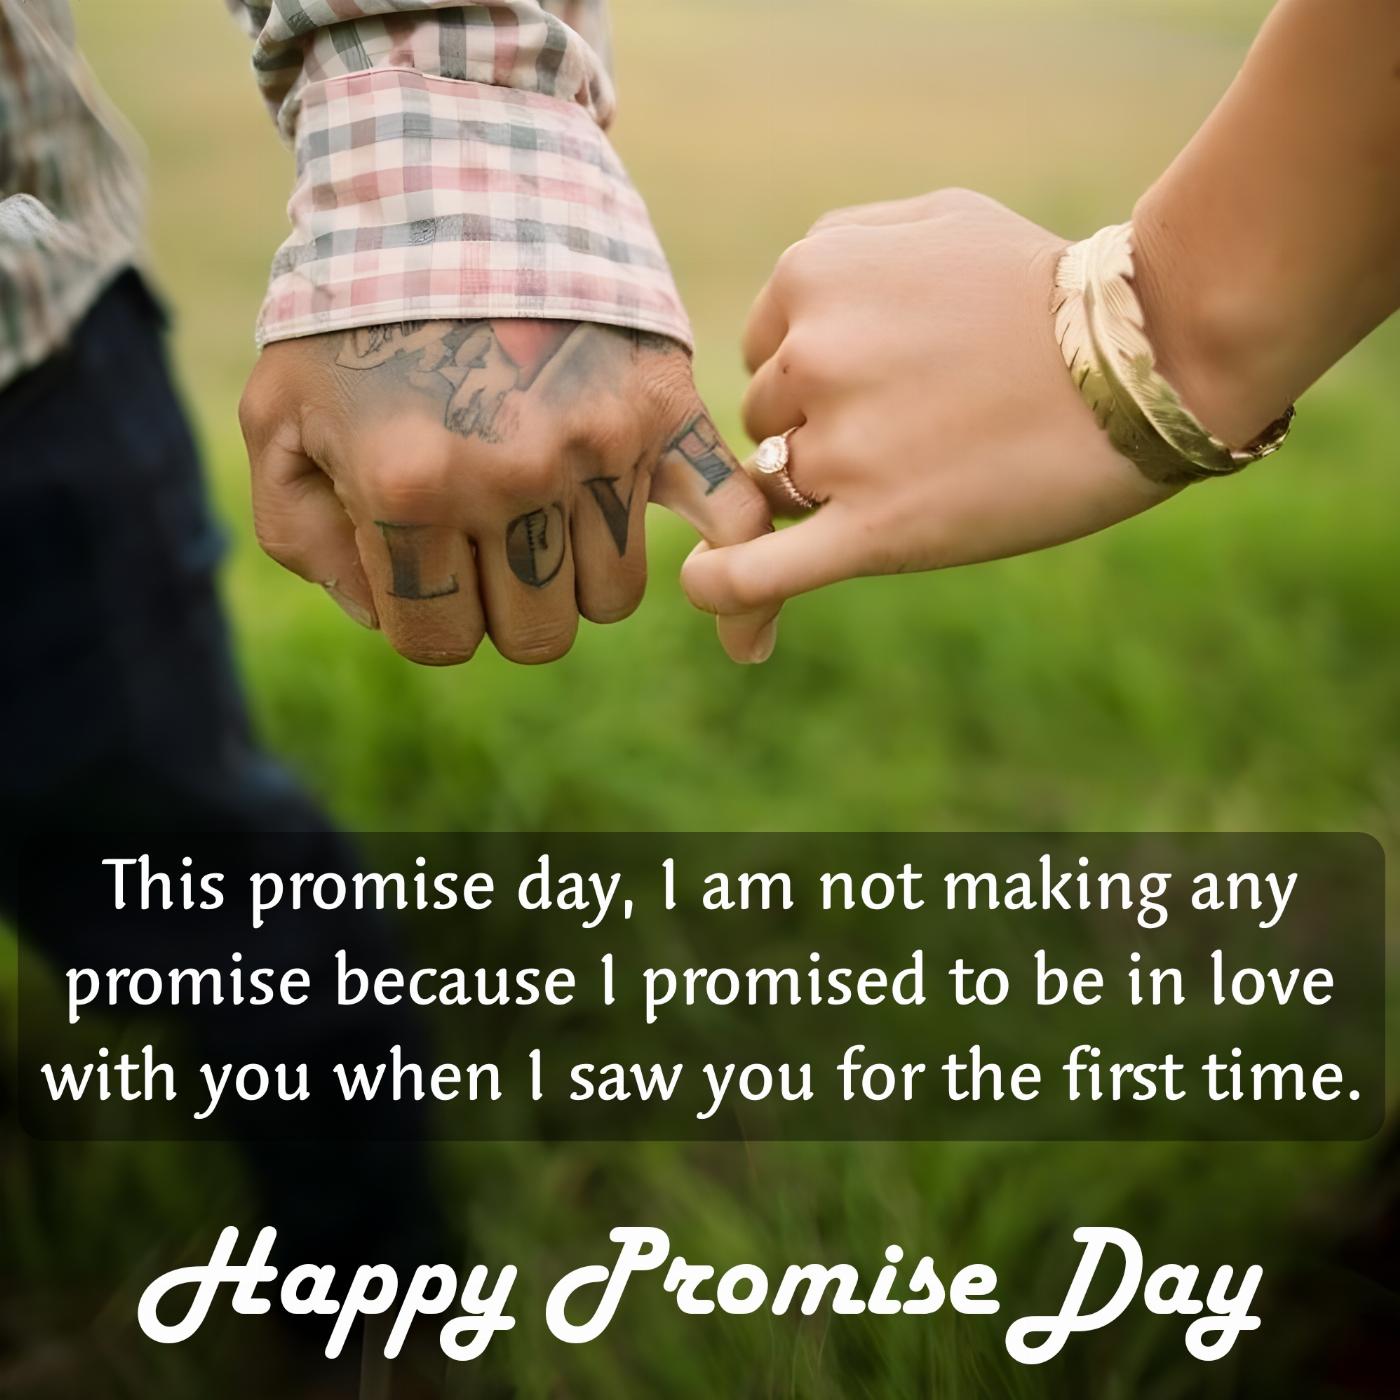 This promise day I am not making any promise